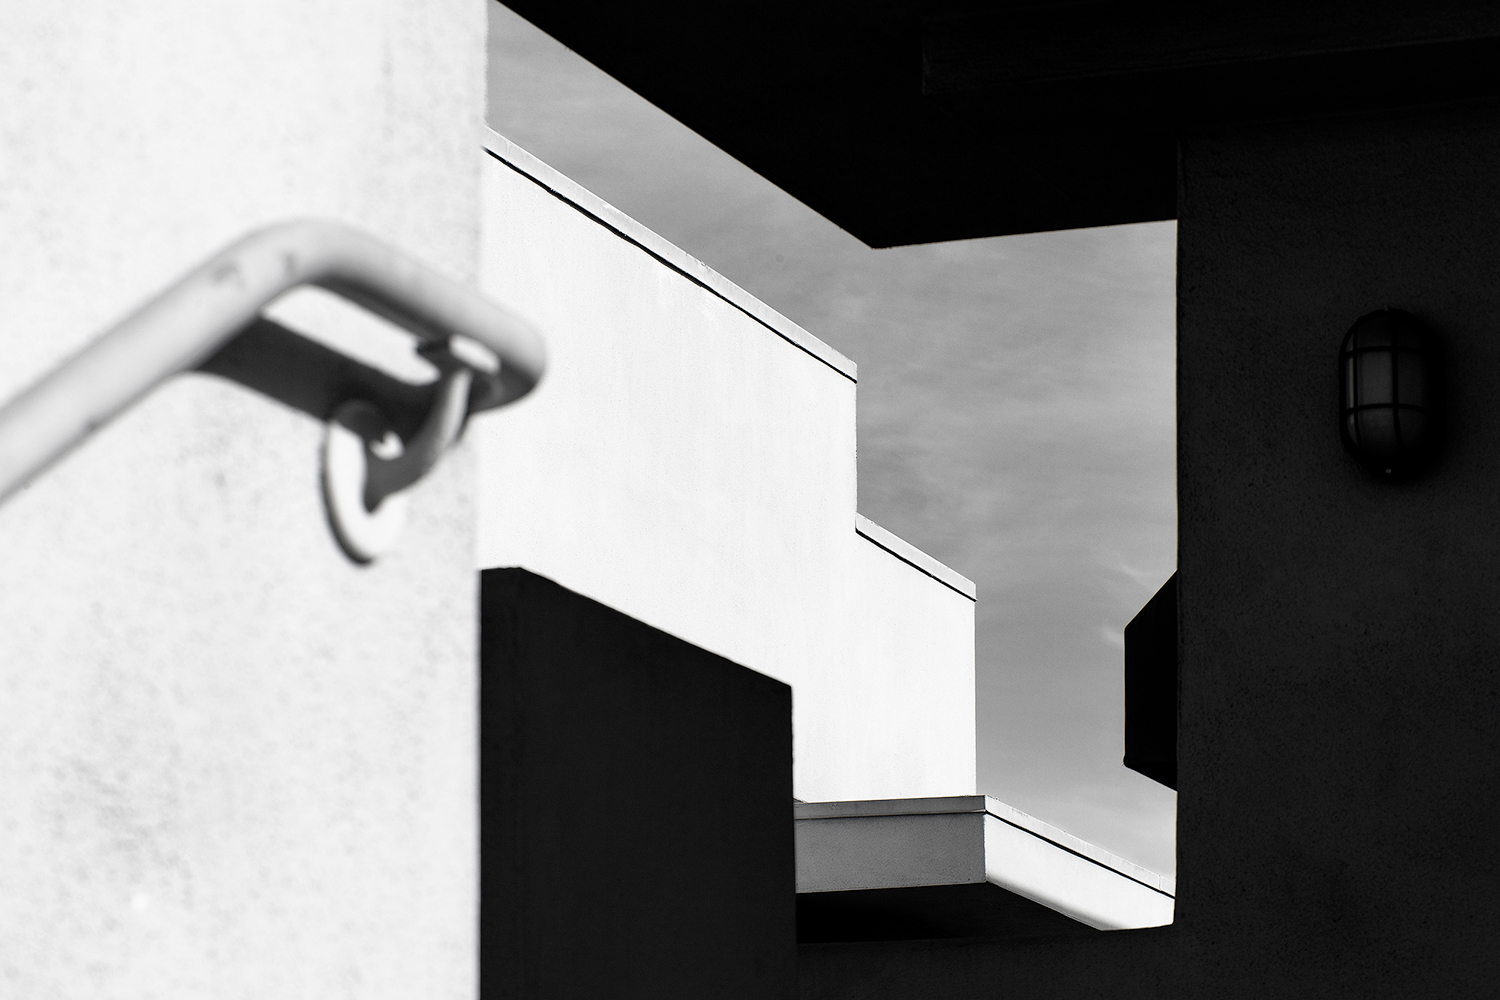 Architectural photography exterior: San diego, CA, USA. Image (C) Matthewlingphotography.co.uk